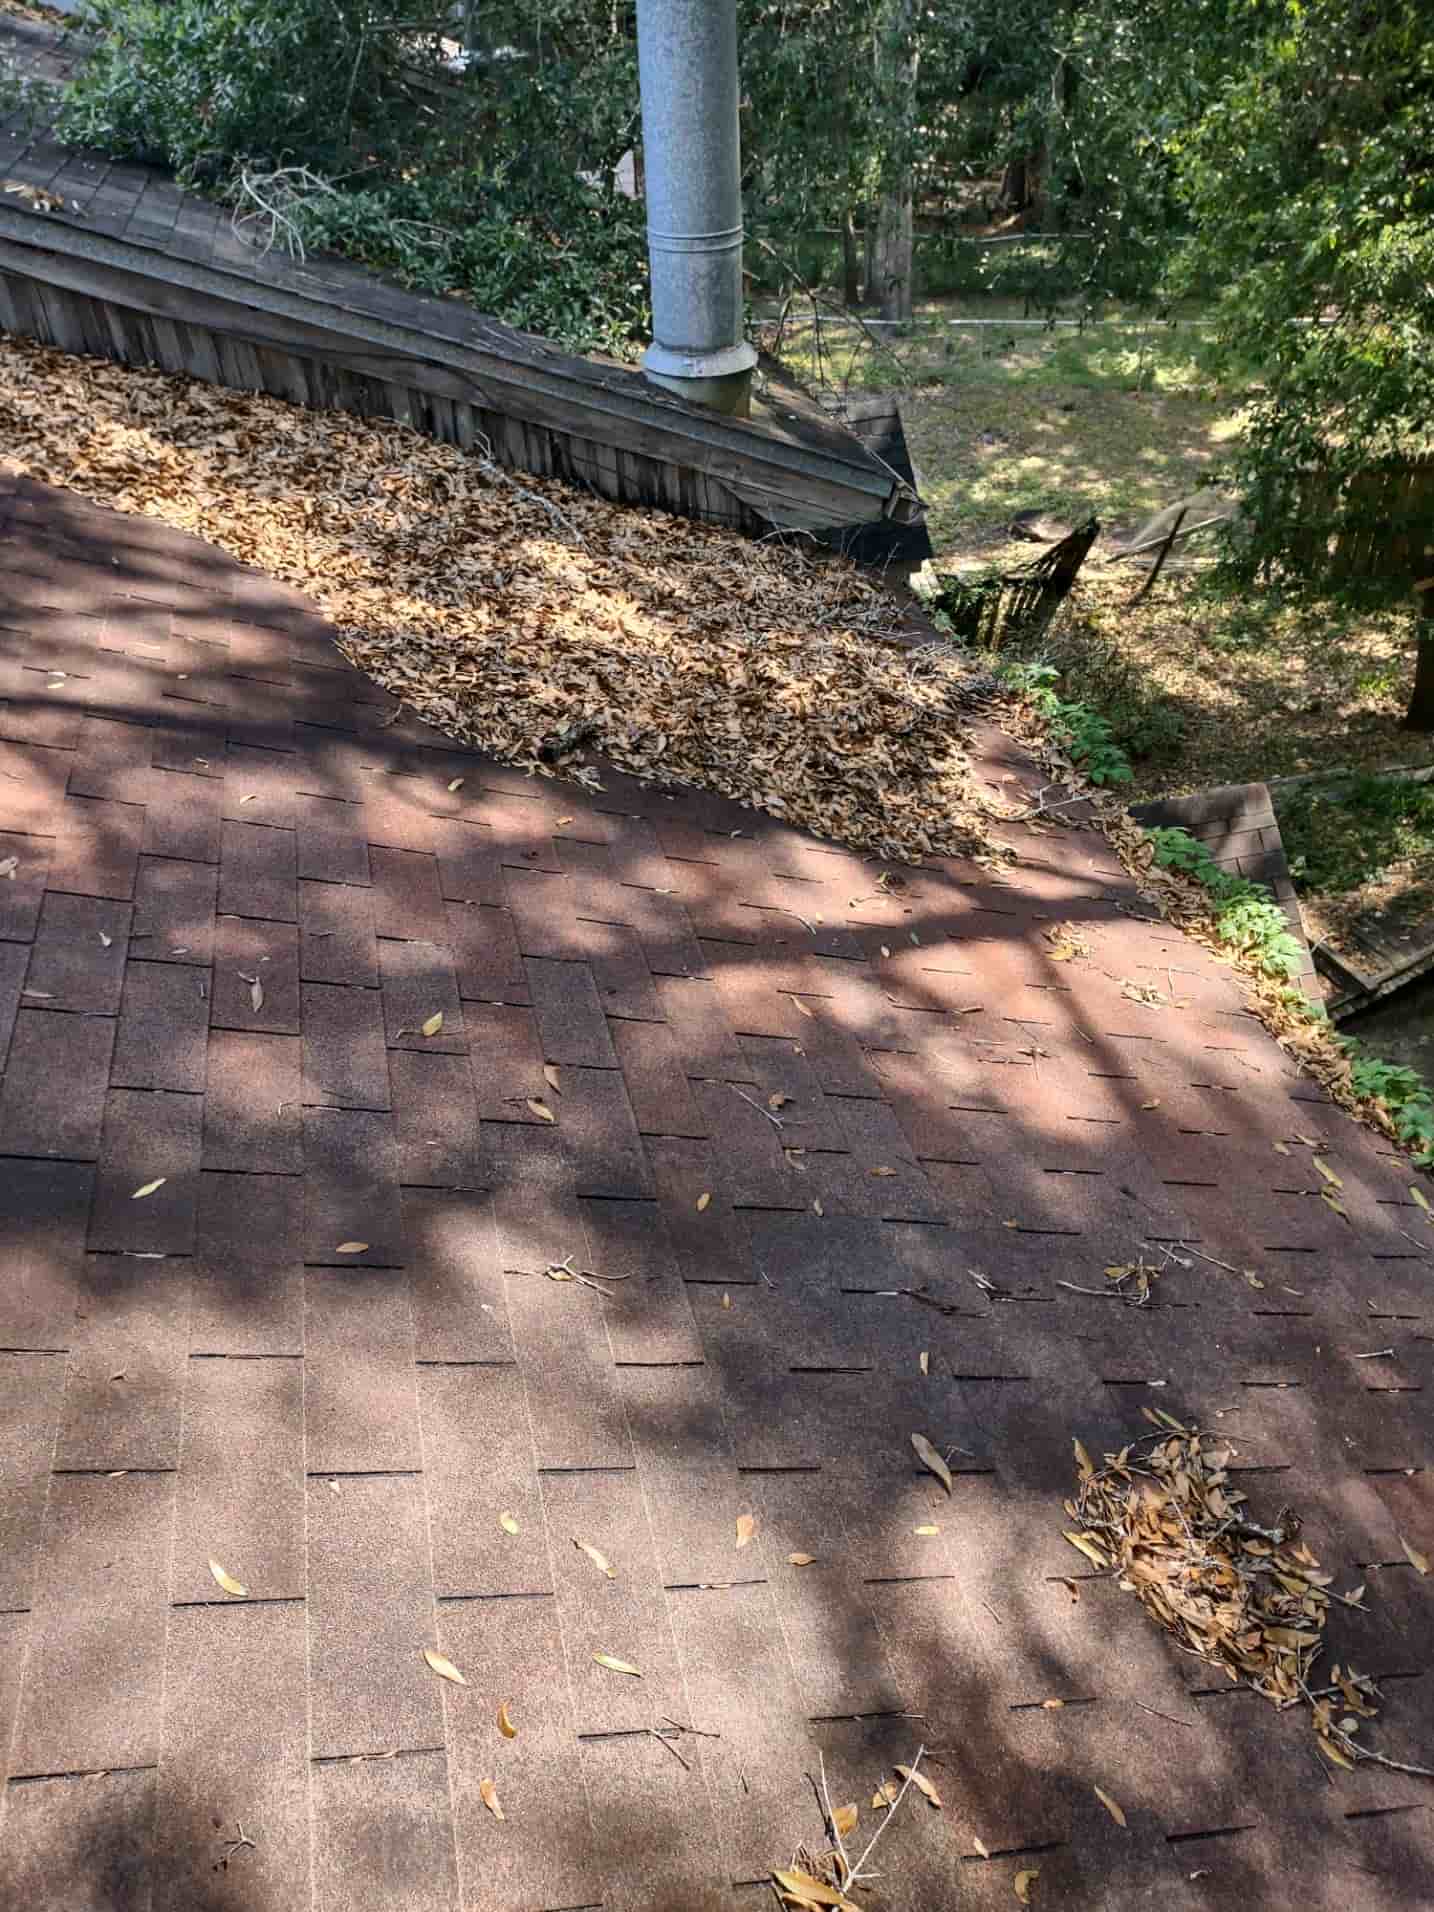 cost to clean gutters per foot